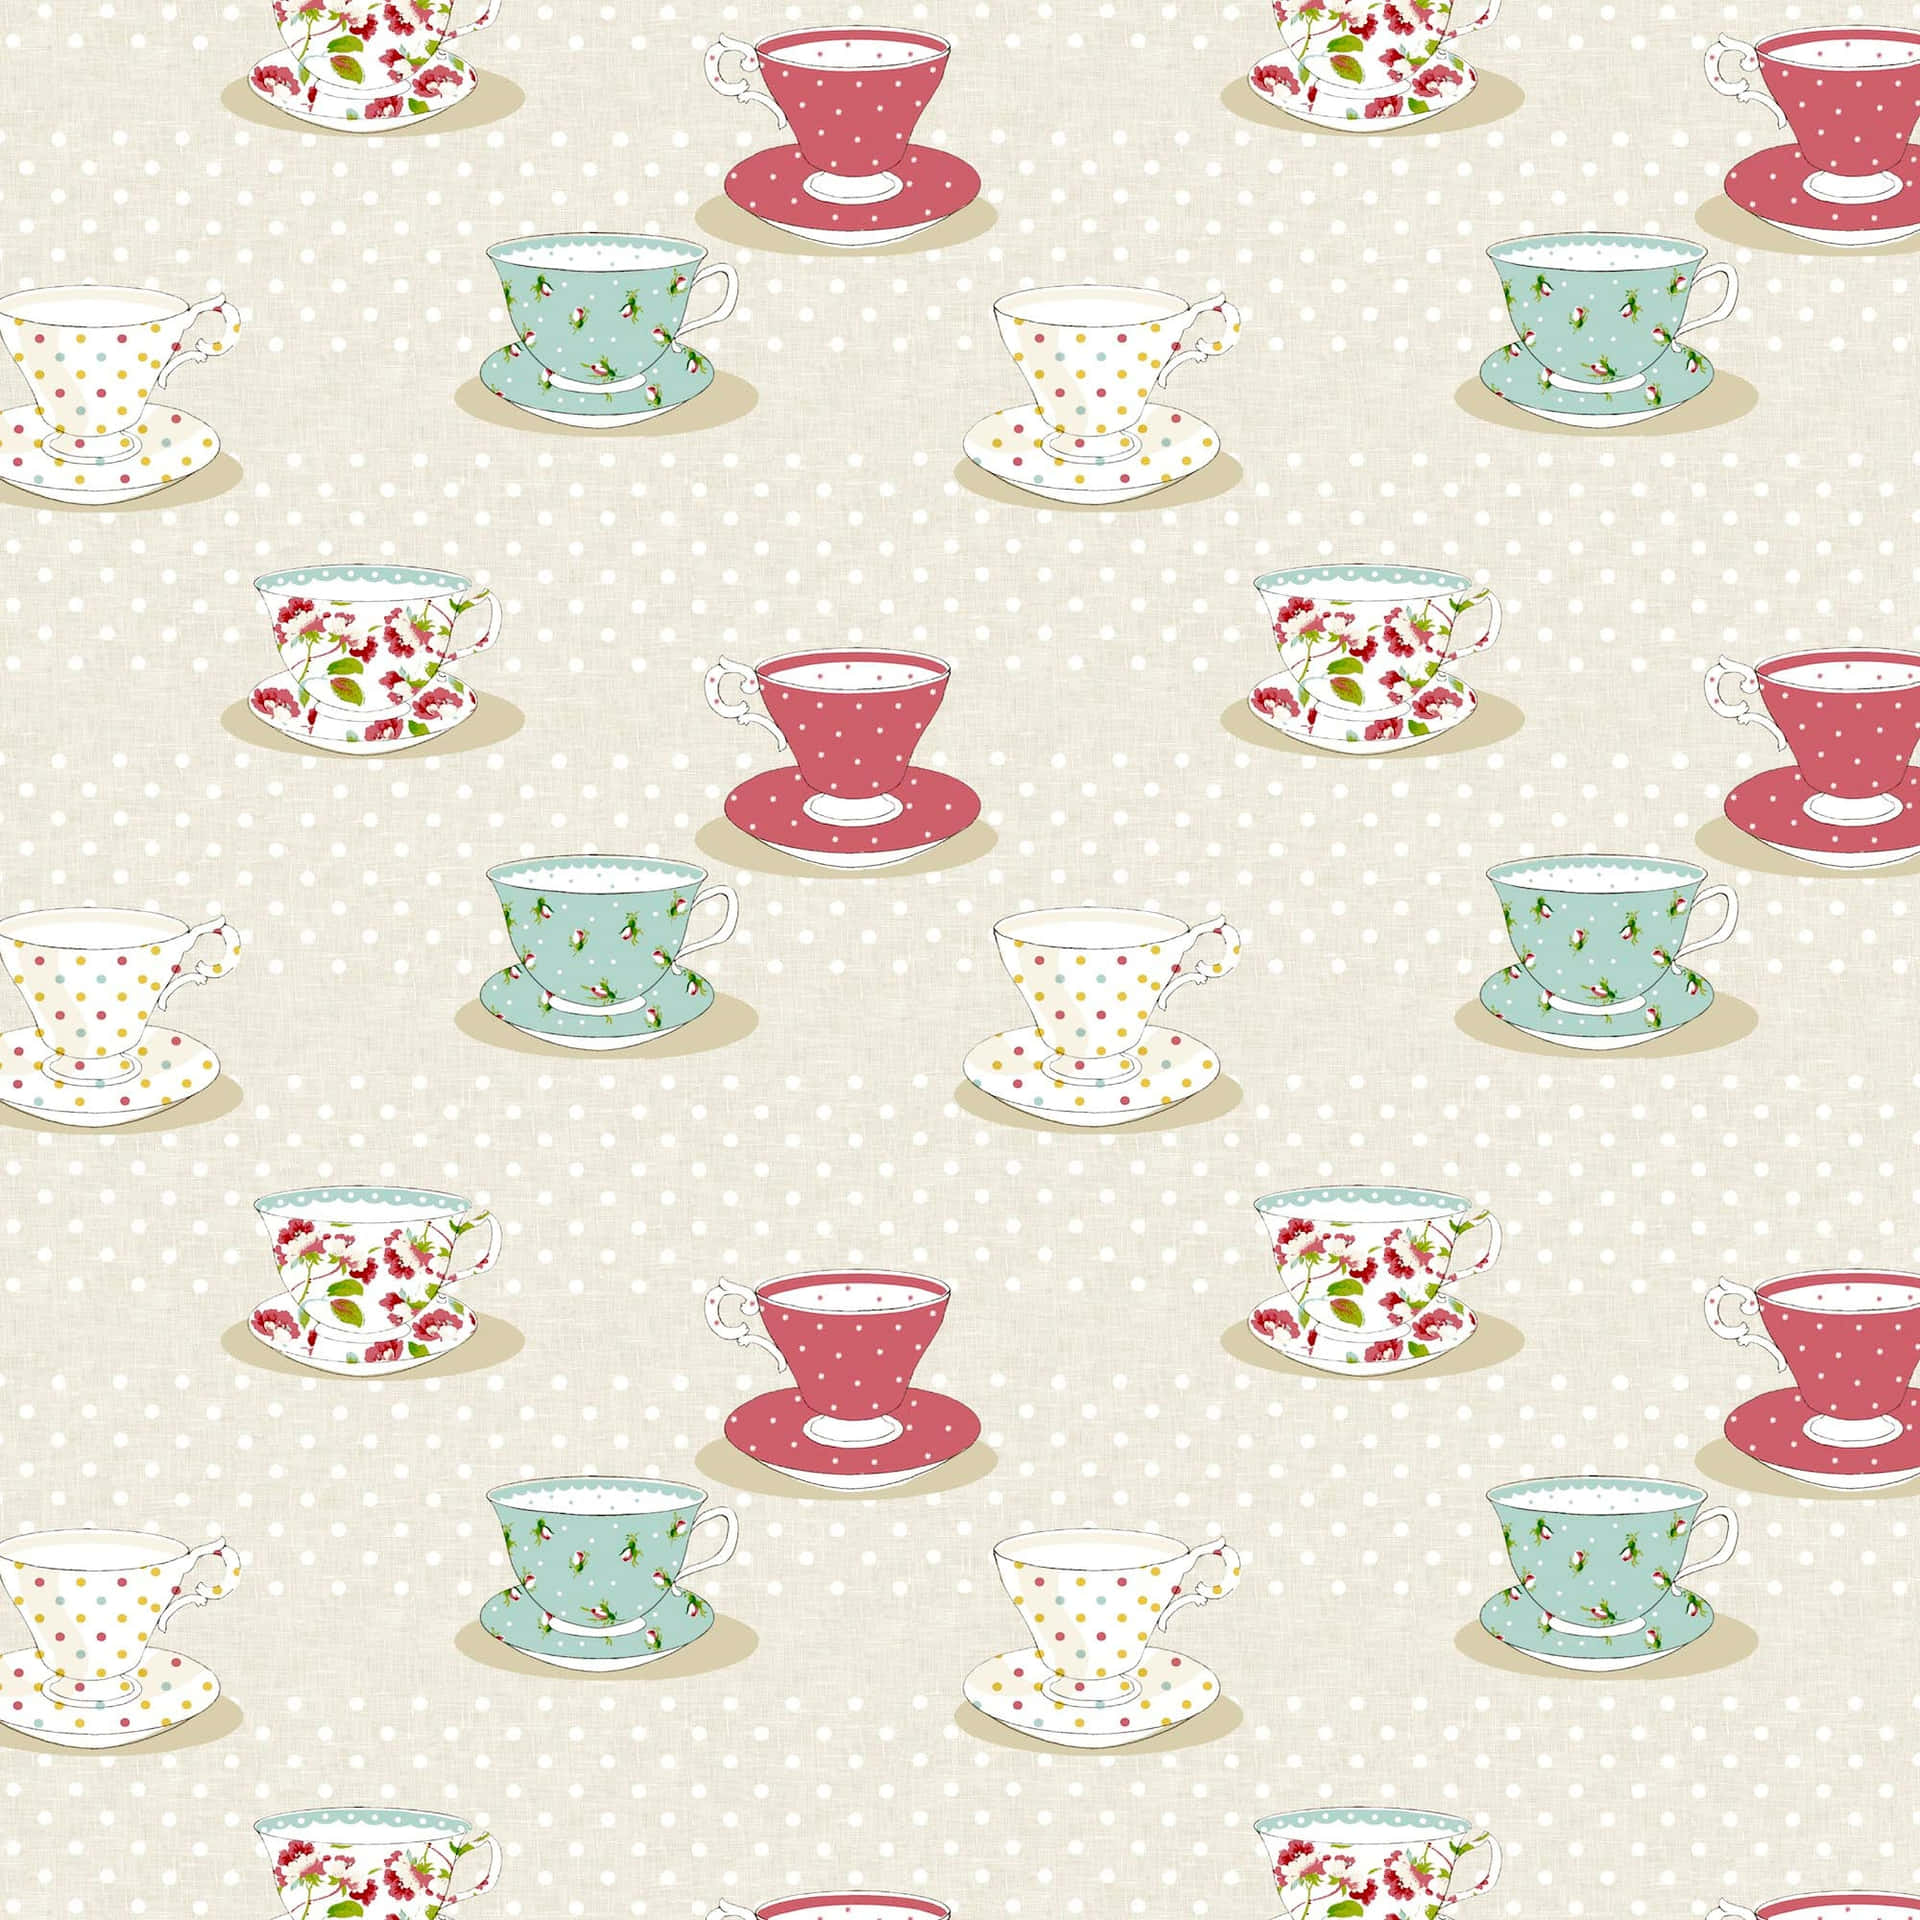 Aesthetic Tea Cup Patterns Picture